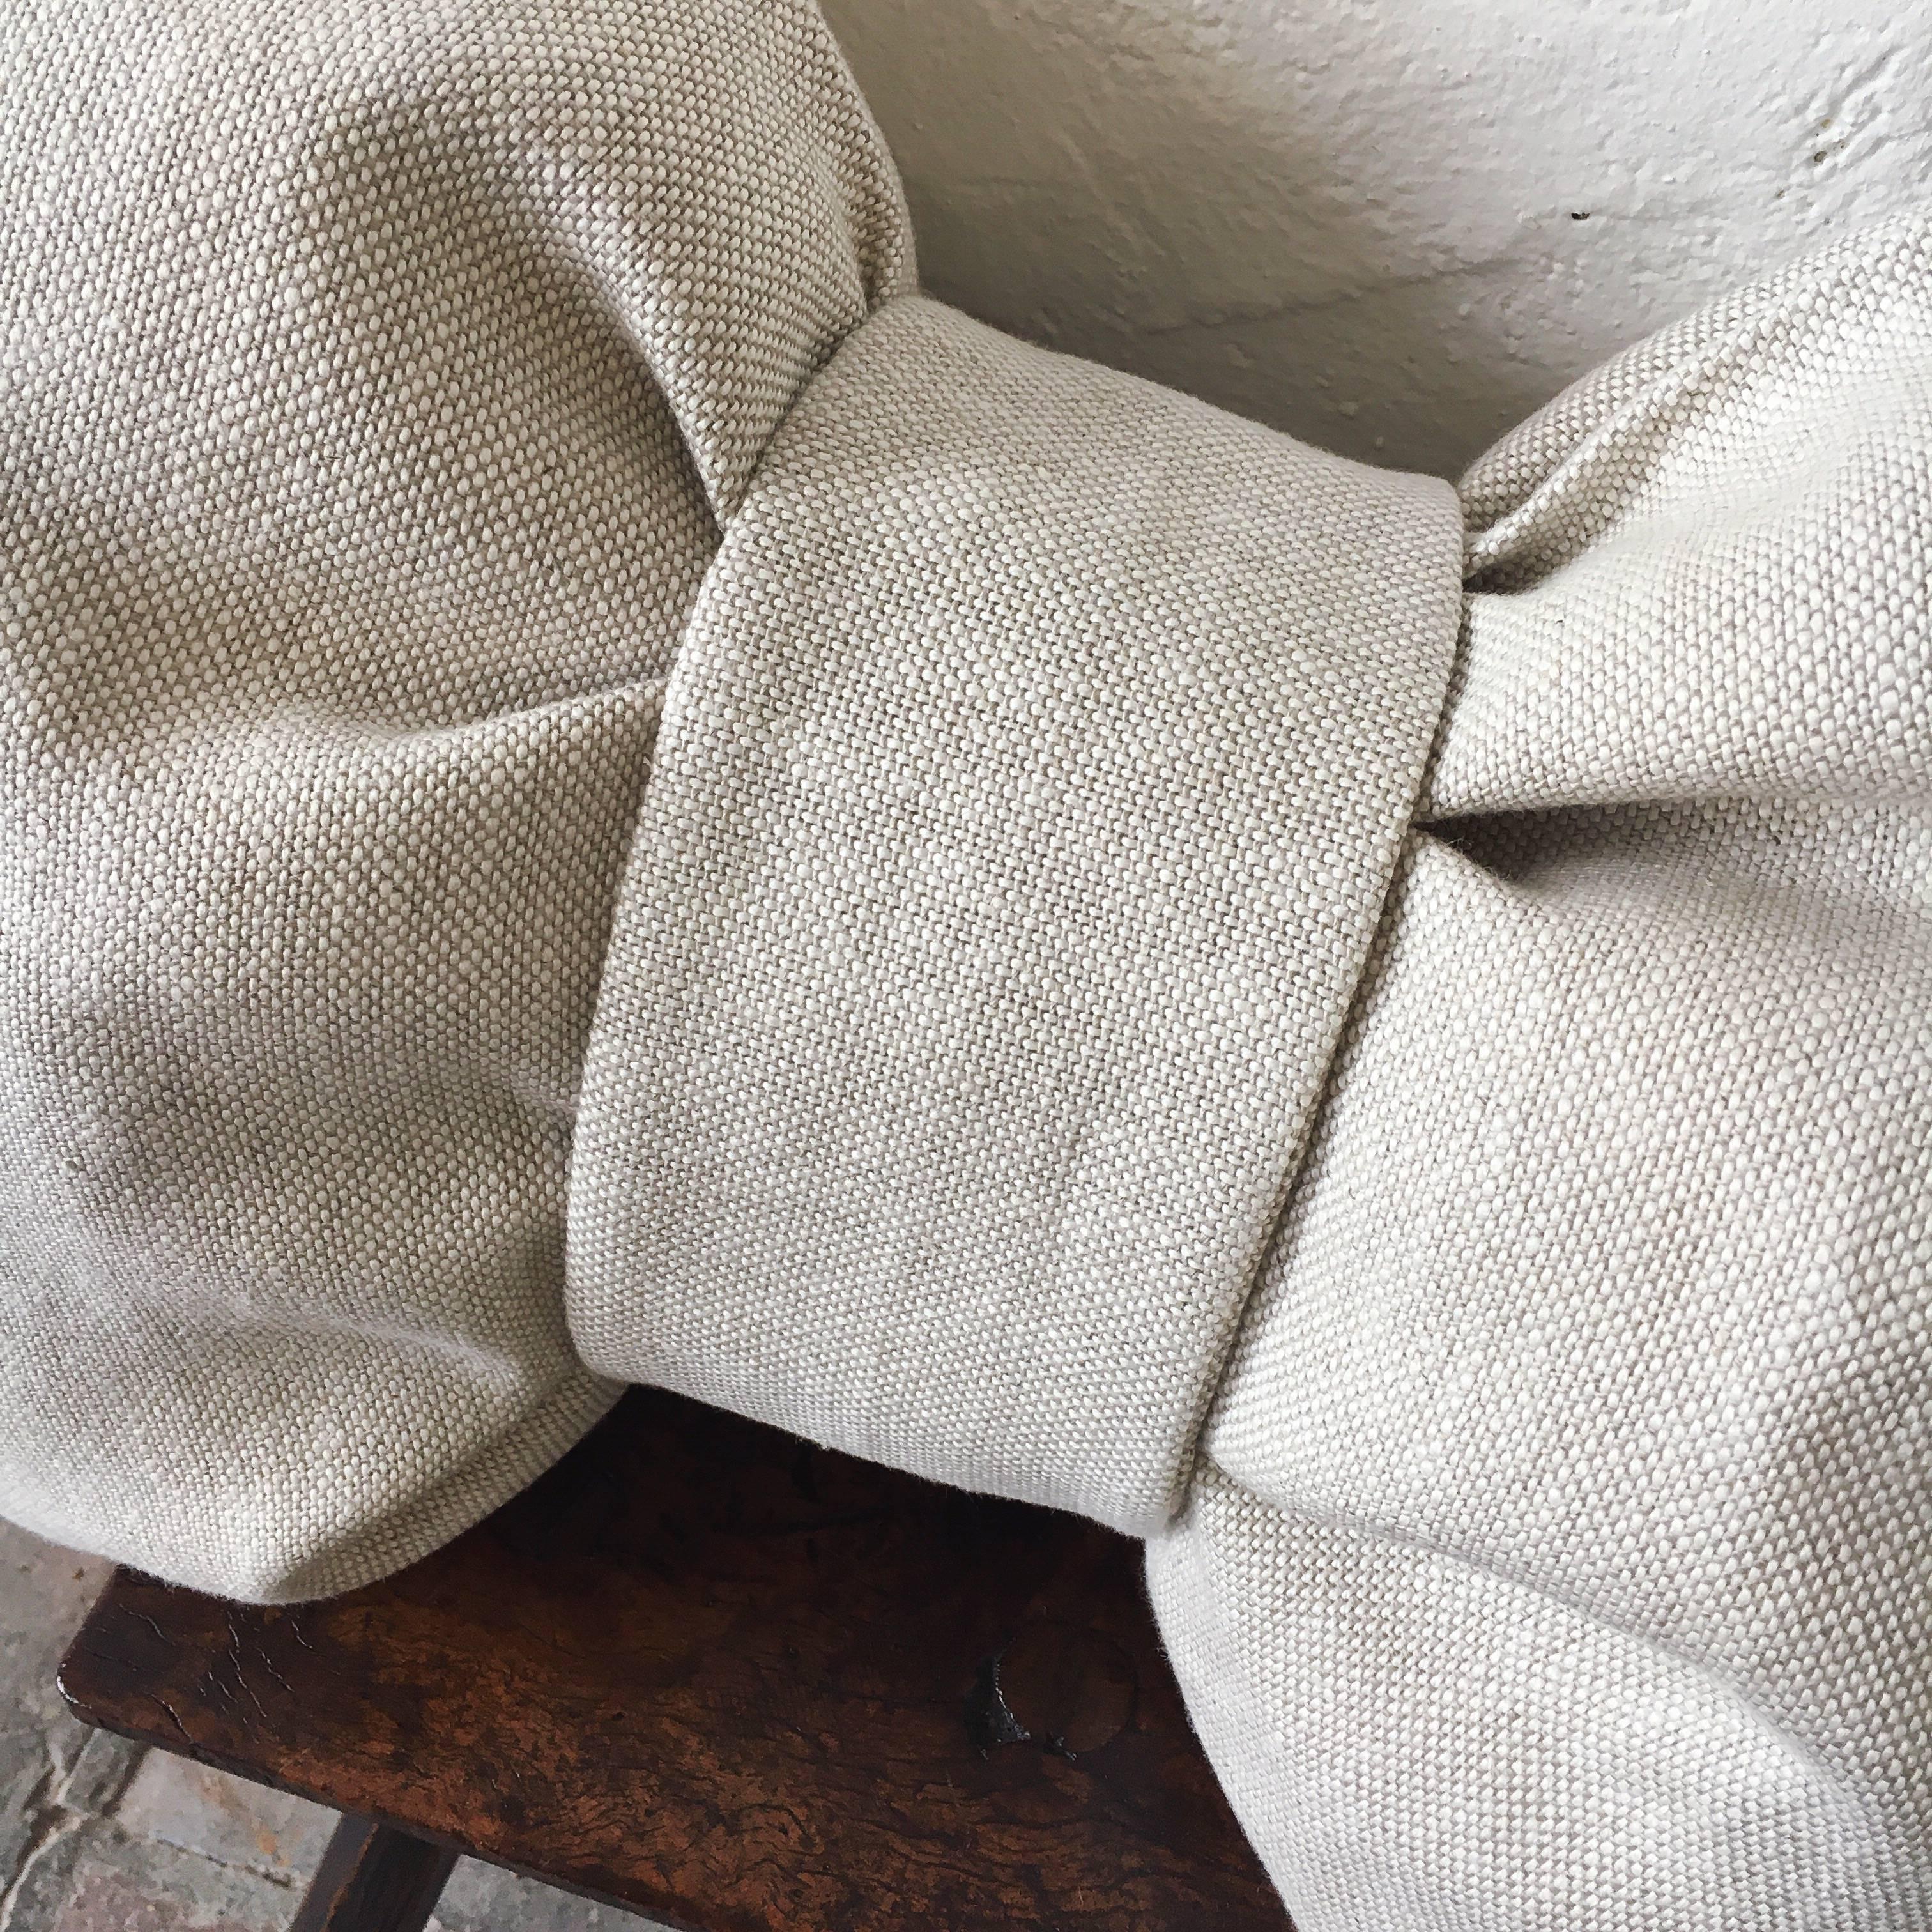 A pair of custom-made contemporary luxury cushions (pillows) constructed from 100% pure Irish linen made from the flax plant, the Aristocrat of textiles, and certified by the Irish Linen Guild. The vintage cloth is from an unused roll, is heavy